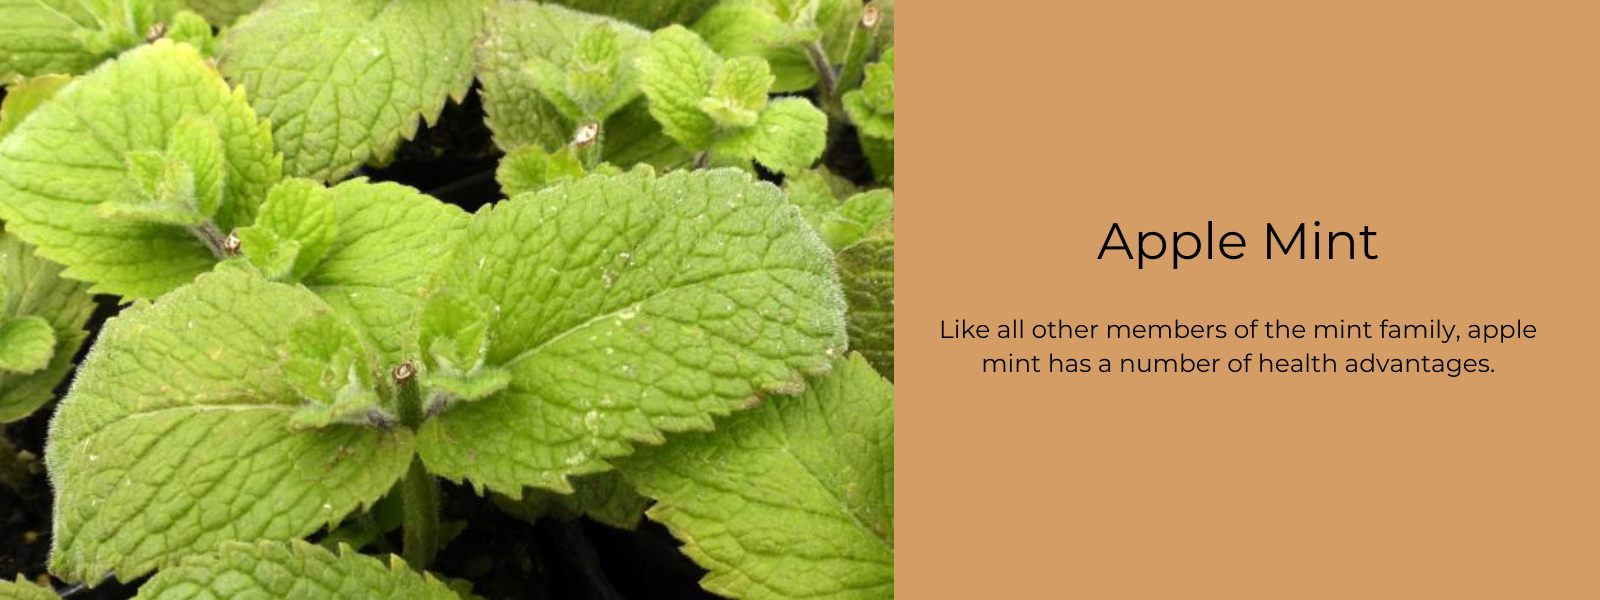 5 Health Benefits of Mint - Why Mint Leaves Are Good For You